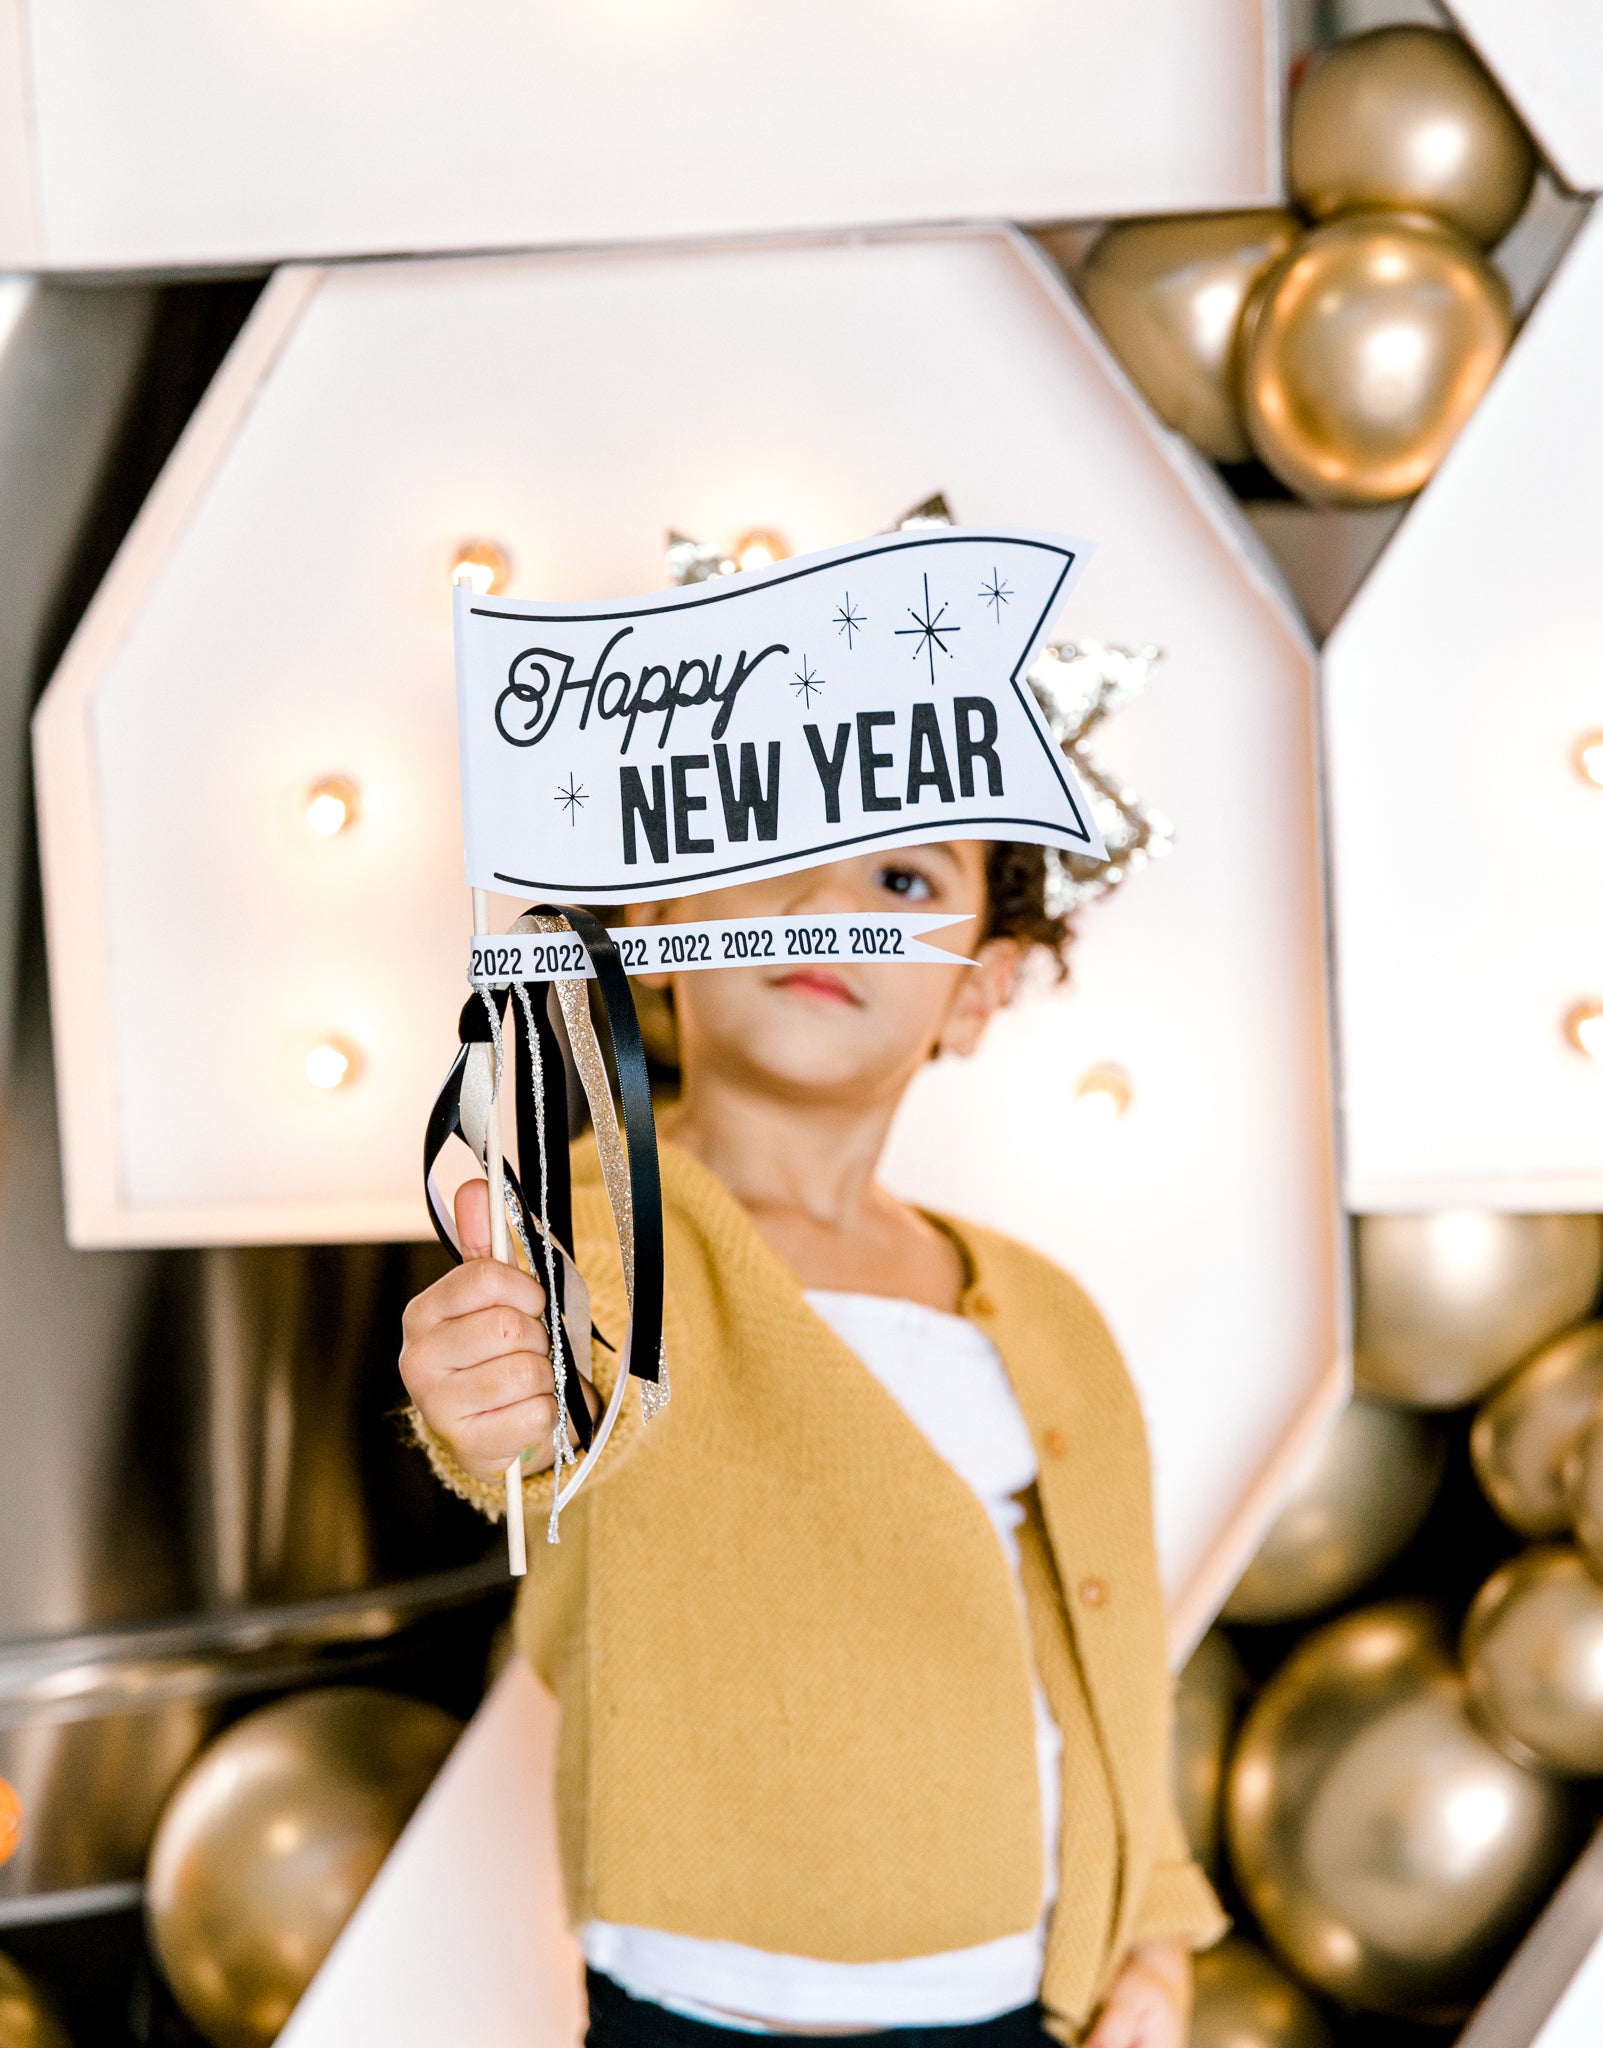 New Years Eve party flag decoration and party favor